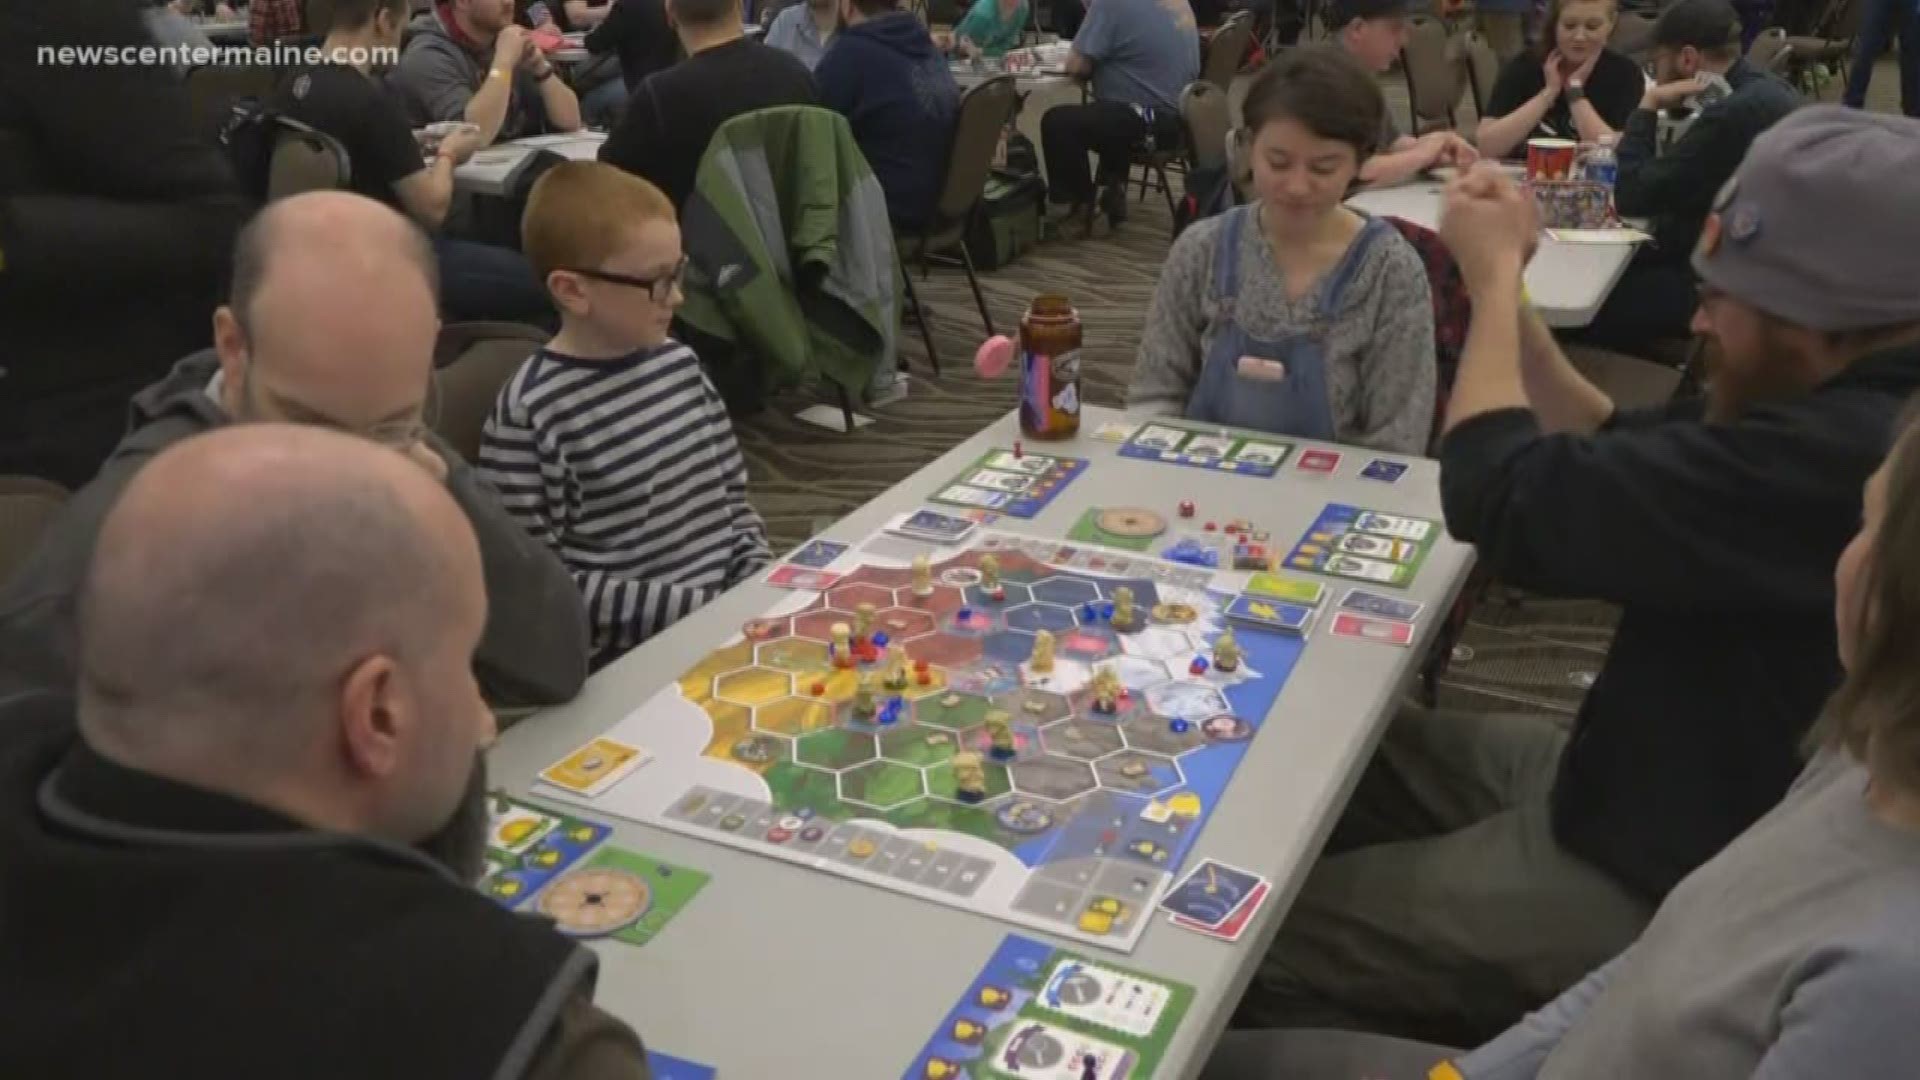 Whether you're a video gamer, card game or board game enthusiast, chances are you'd have fun this weekend at Bangor's SnowCon.